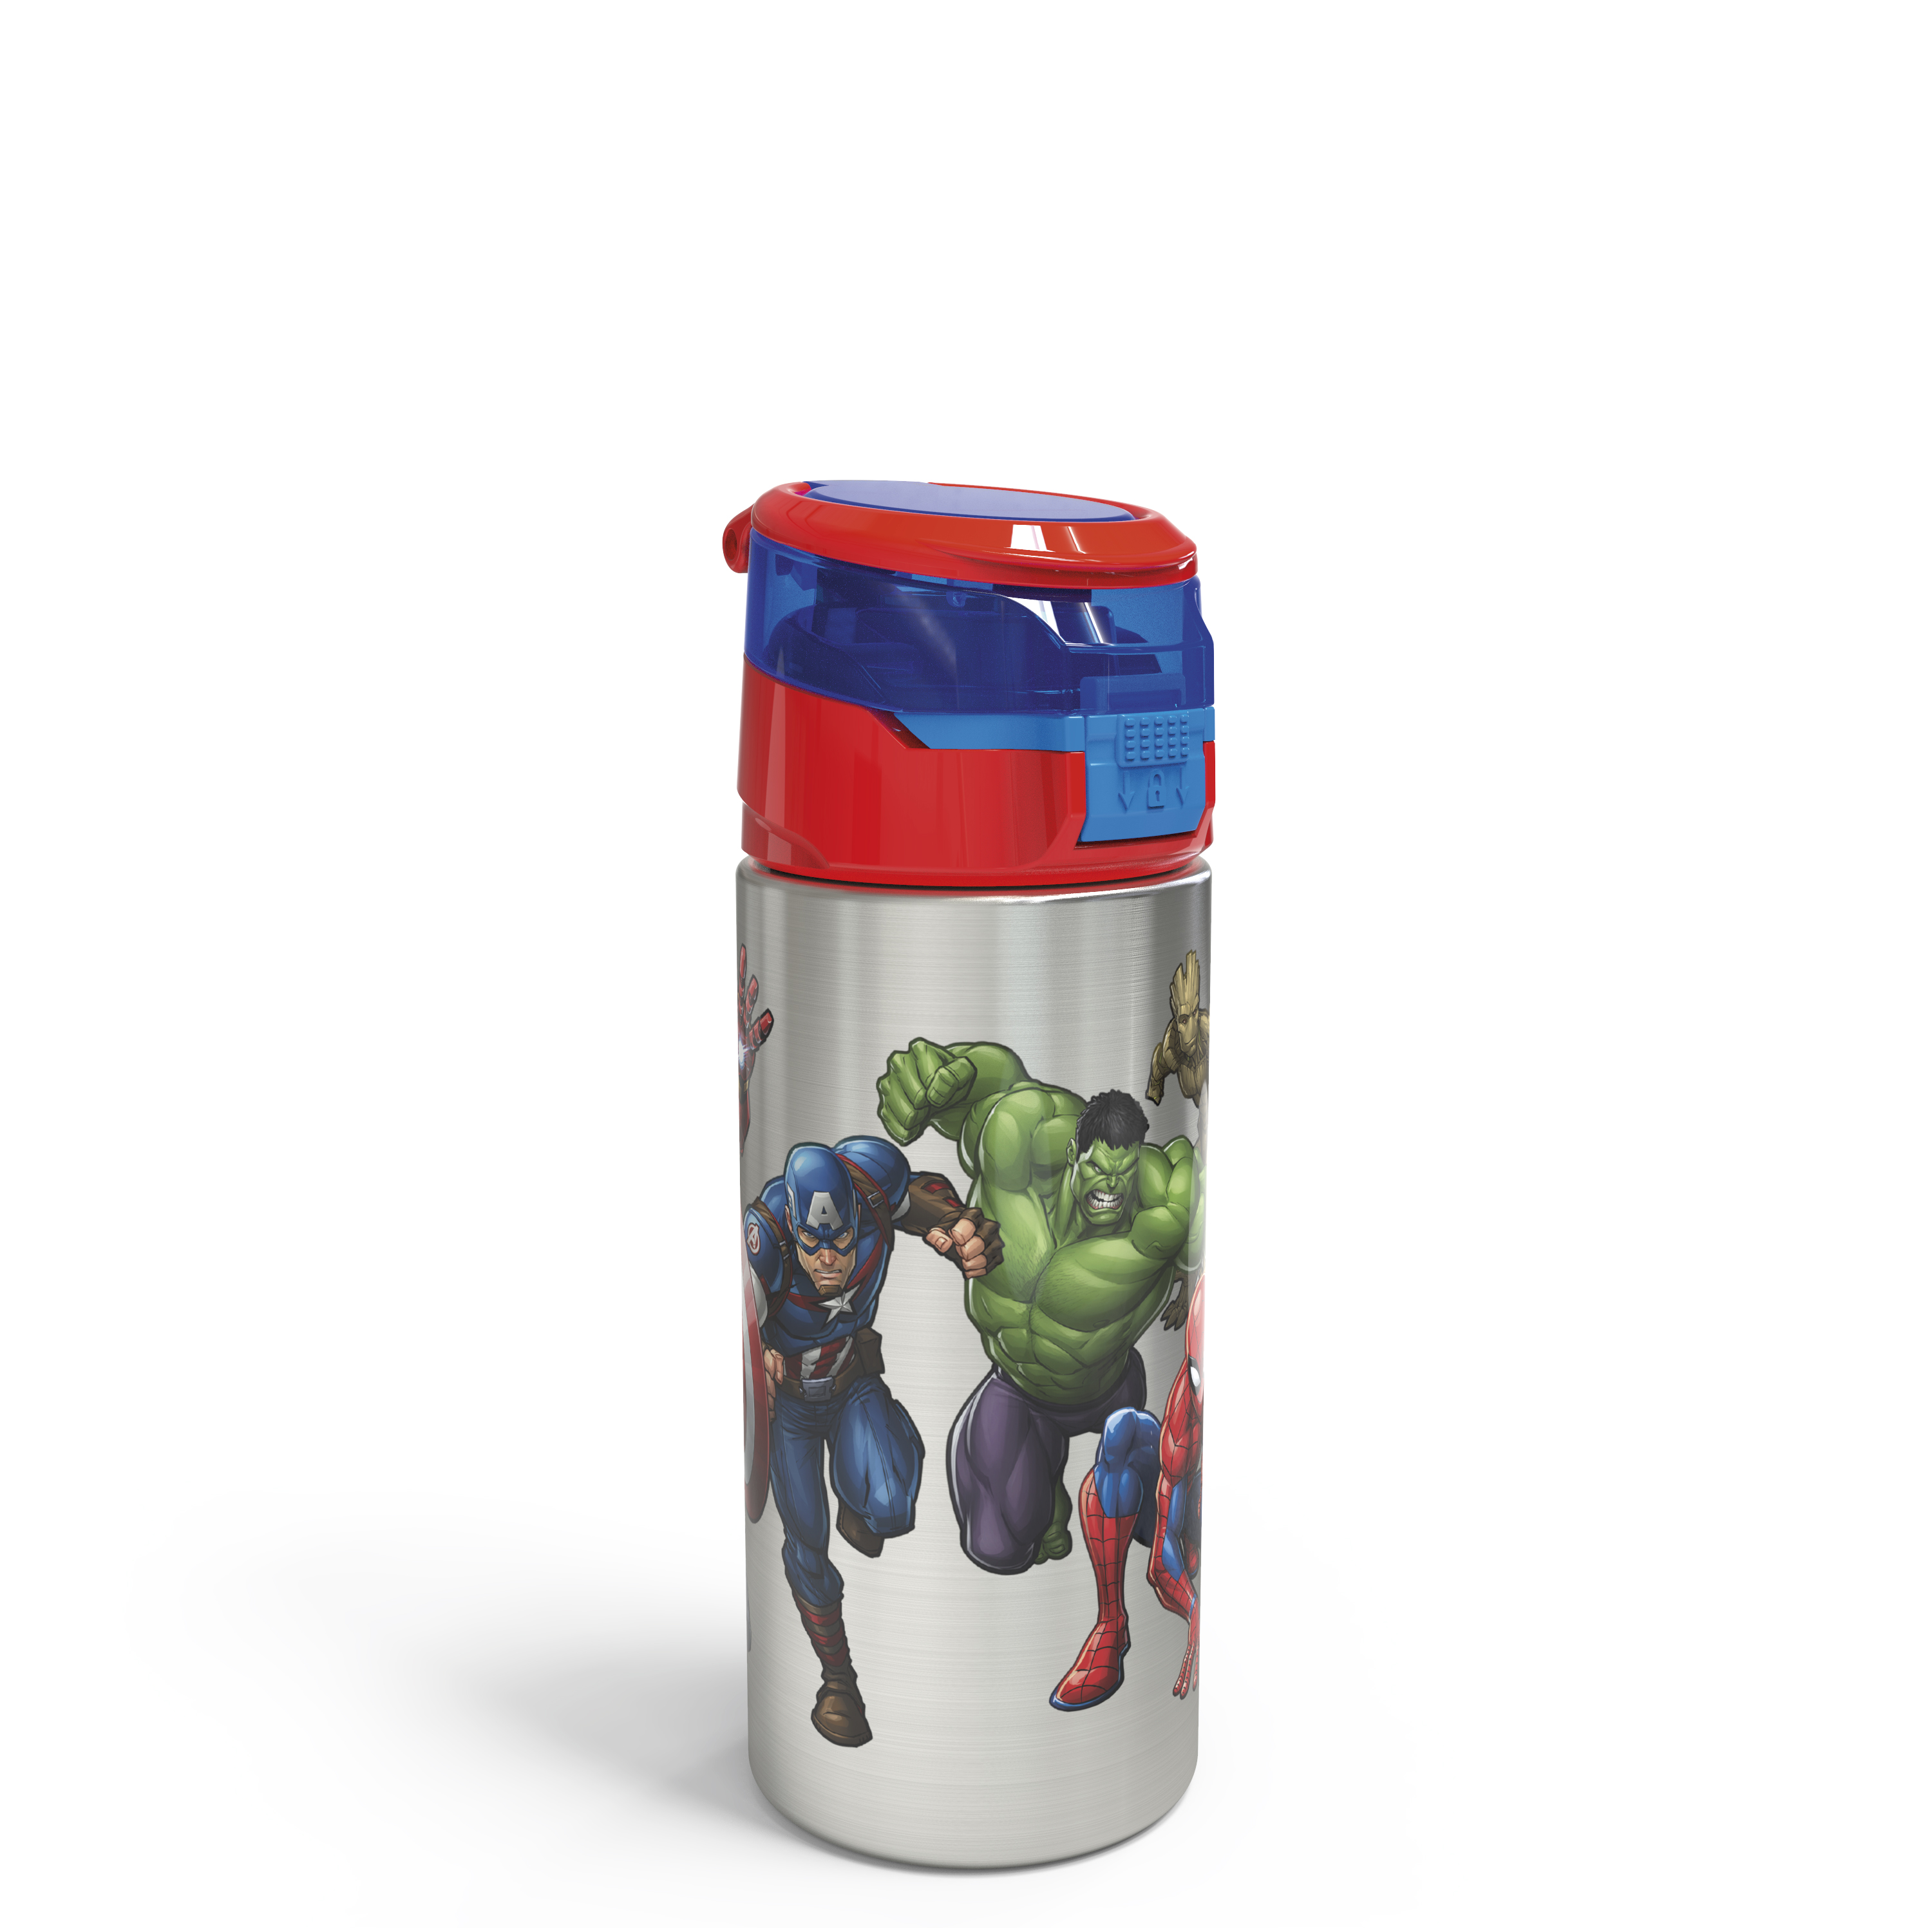 Marvel Comics 19.5 ounce Stainless Steel Water Bottle with Straw, Captain America, Spider-Man & The Hulk slideshow image 10